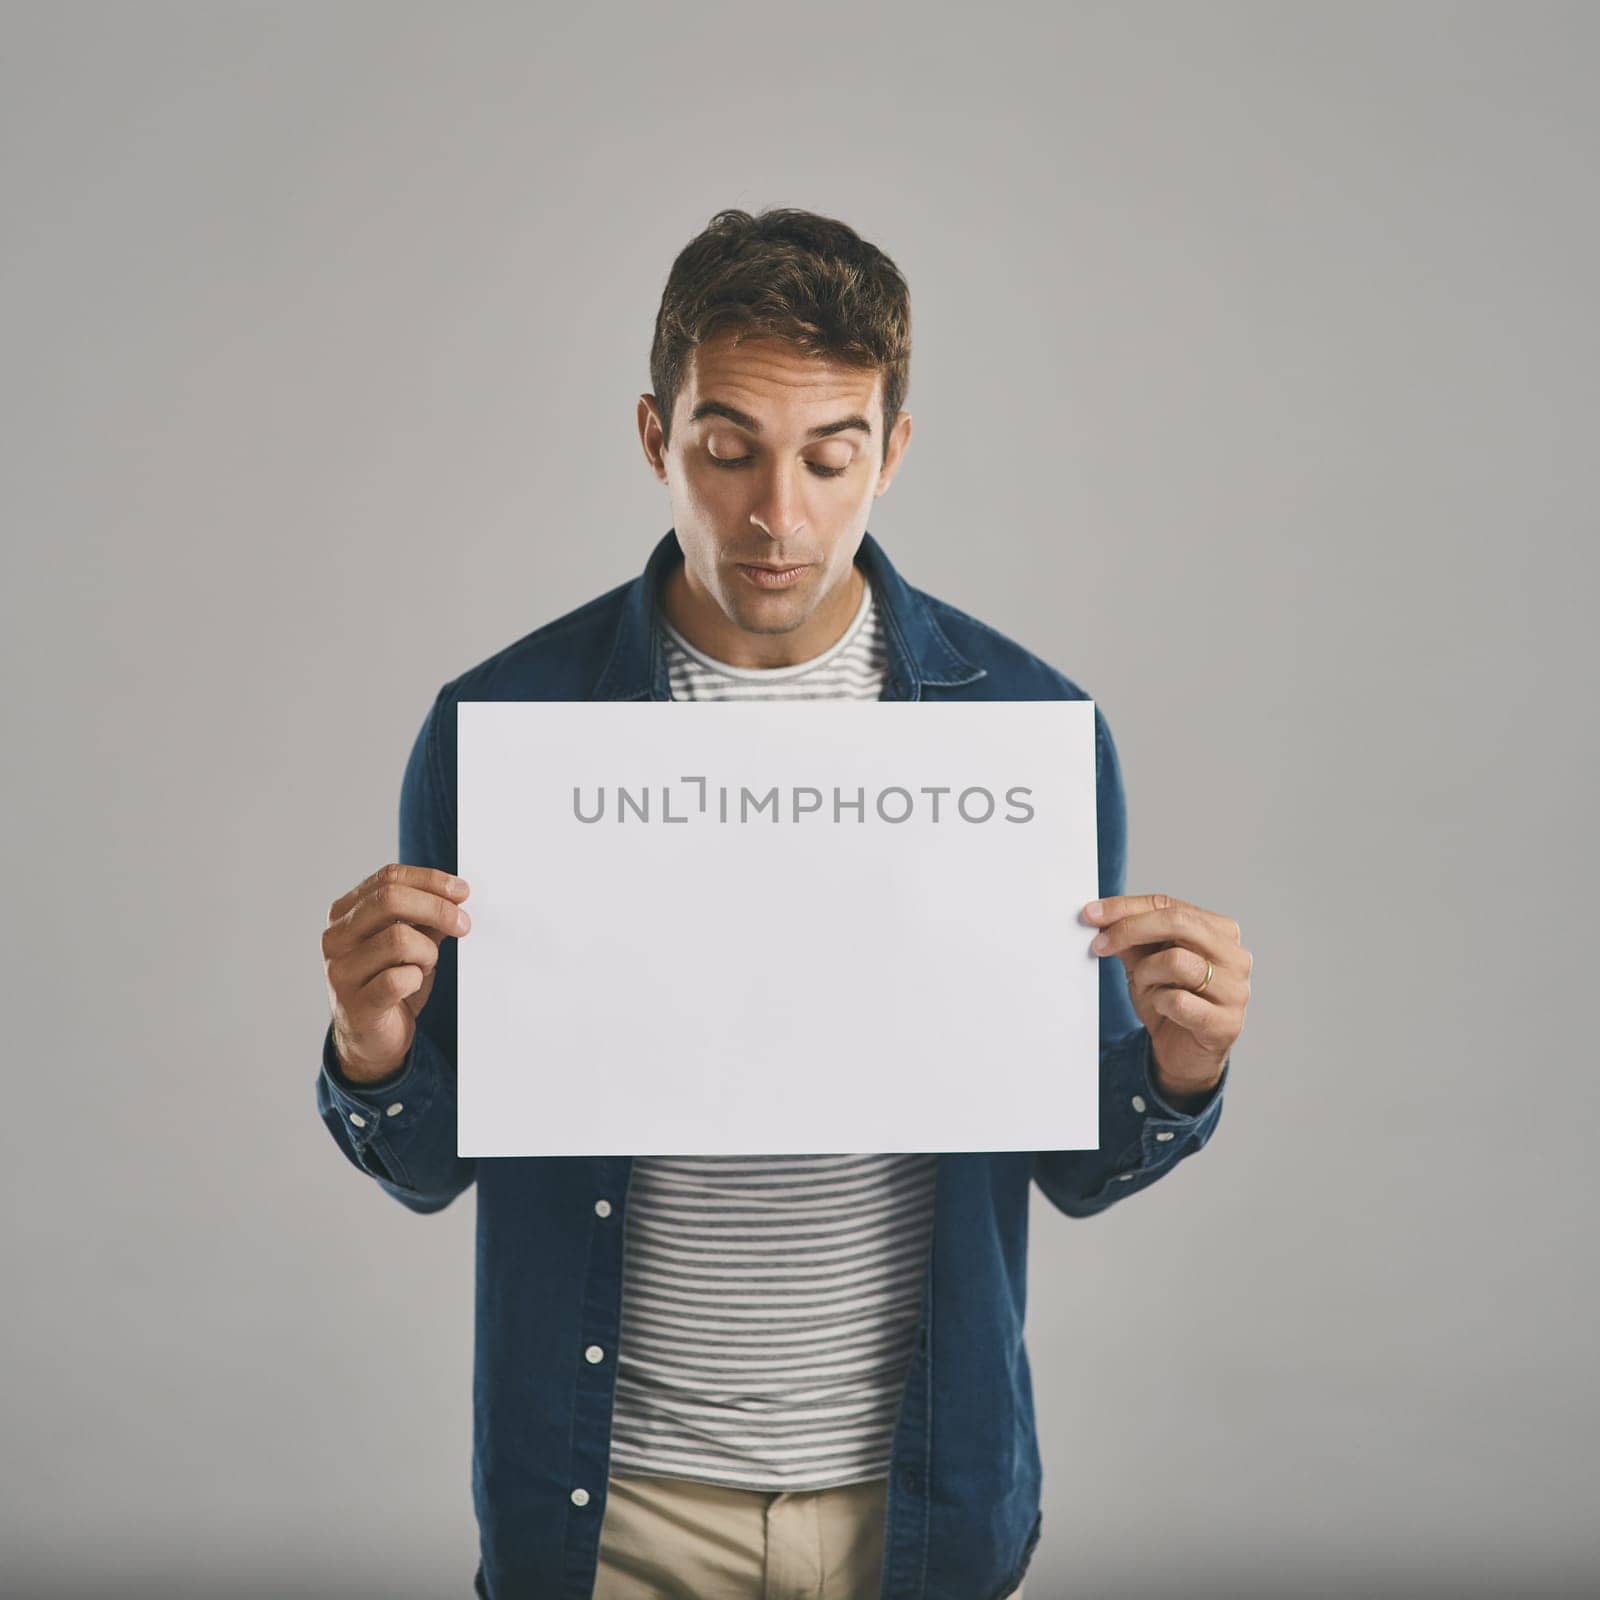 Ooh, what do we have here...Studio shot of a young man holding a blank placard against a grey background. by YuriArcurs